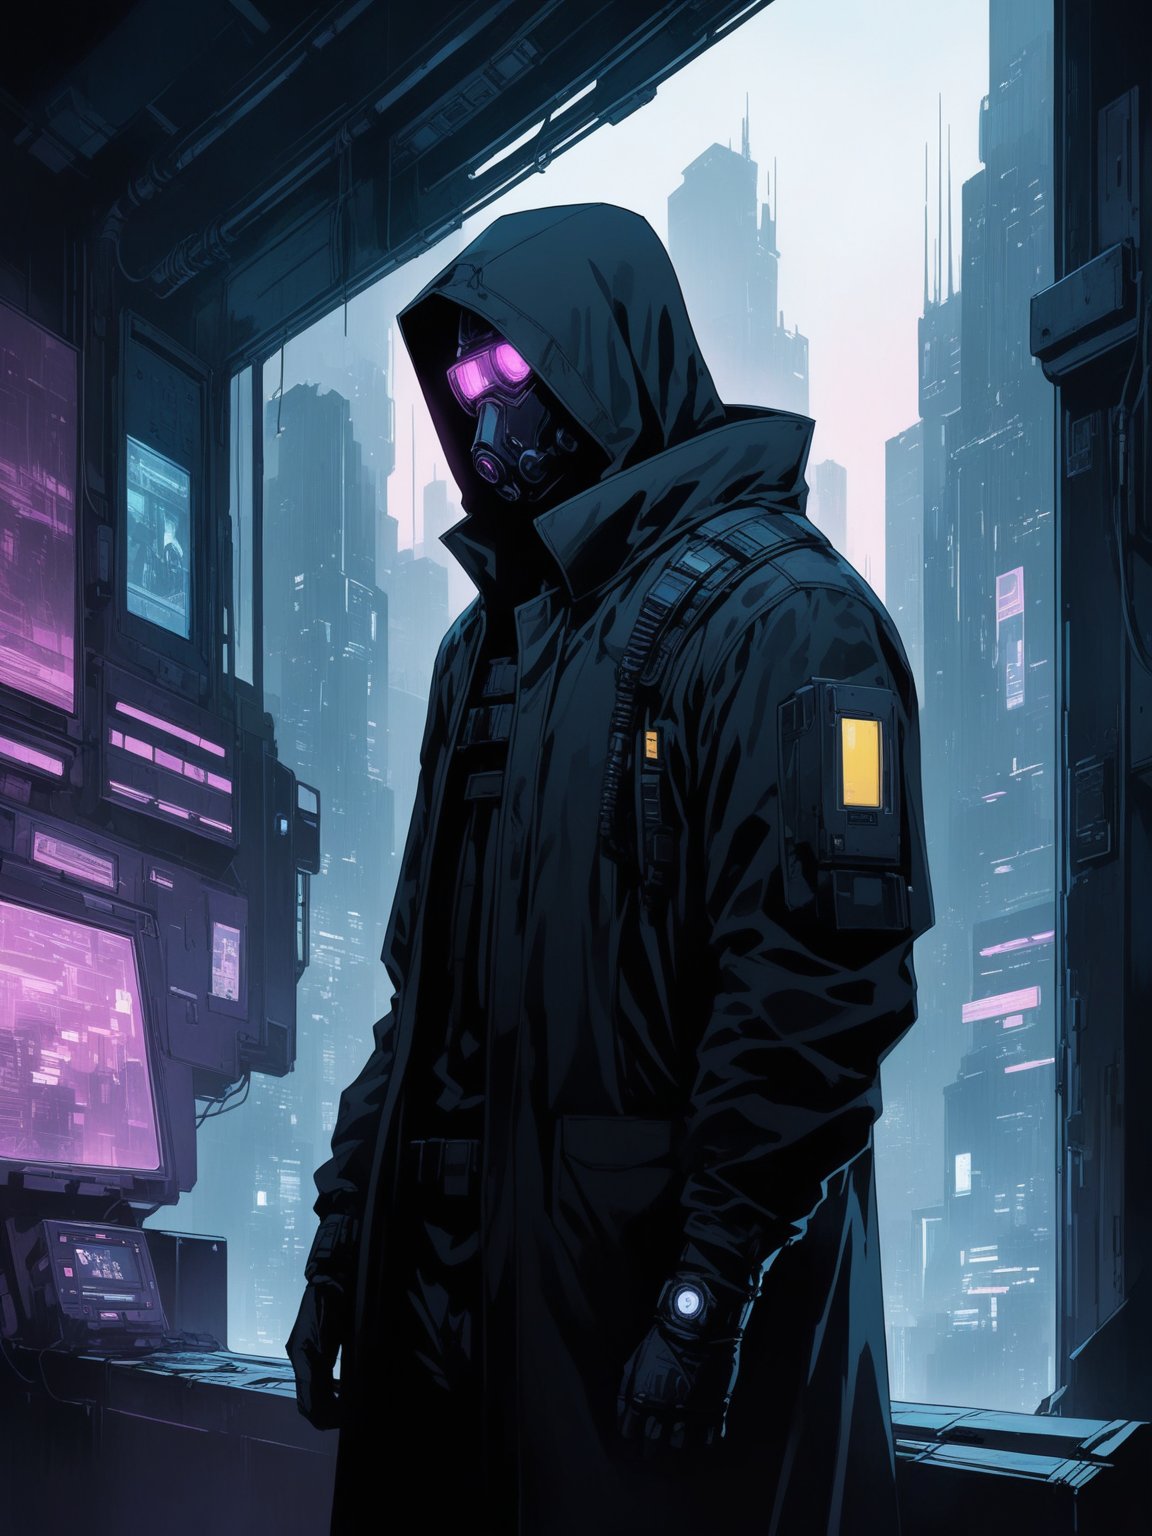 In the dystopian cityscape of cyberpunk, a mysterious figure shrouded in shadows stands, exuding an air of annoyance. The dusky fade adds an enigmatic touch to the scene as the character gazes out of the window with intense focus. The play of shadows and light creates a cinematic atmosphere, leaving viewers intrigued by the untold story behind this captivating moment. The artist's attention to detail elevates the emotional depth, making this artwork a masterpiece in the realm of cyberpunk aesthetics.